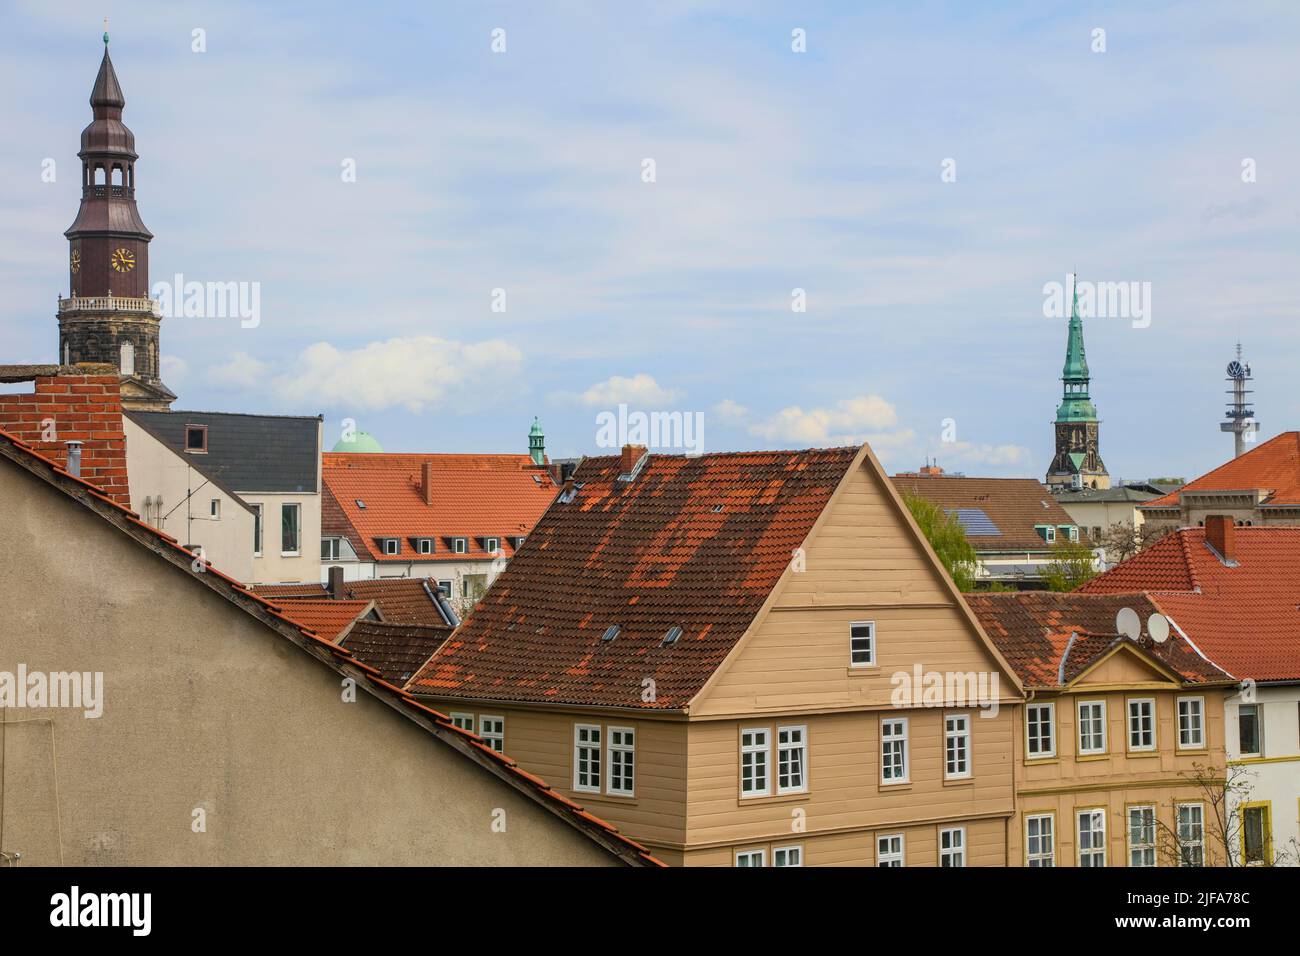 View over the roofs of the Calenberger Neustadt with towers of the churches St. Johannis and Kreuzkirche, state capital Hannover, Lower Saxony Stock Photo